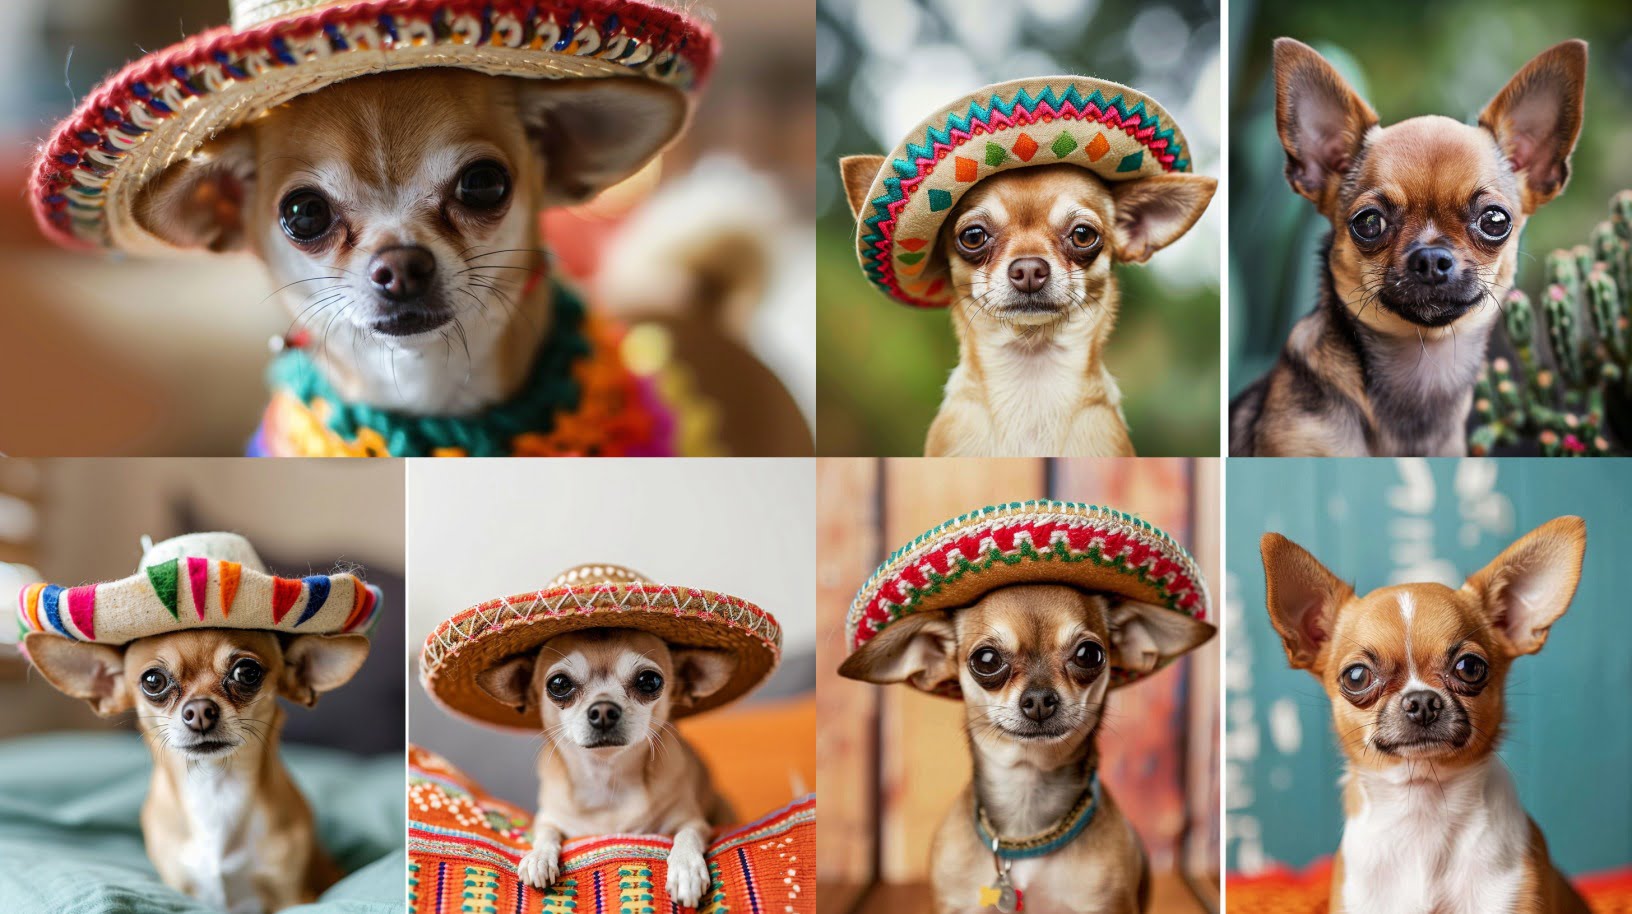 A Chihuahua wearing a tiny sombrero and a photo of the world's smallest dog